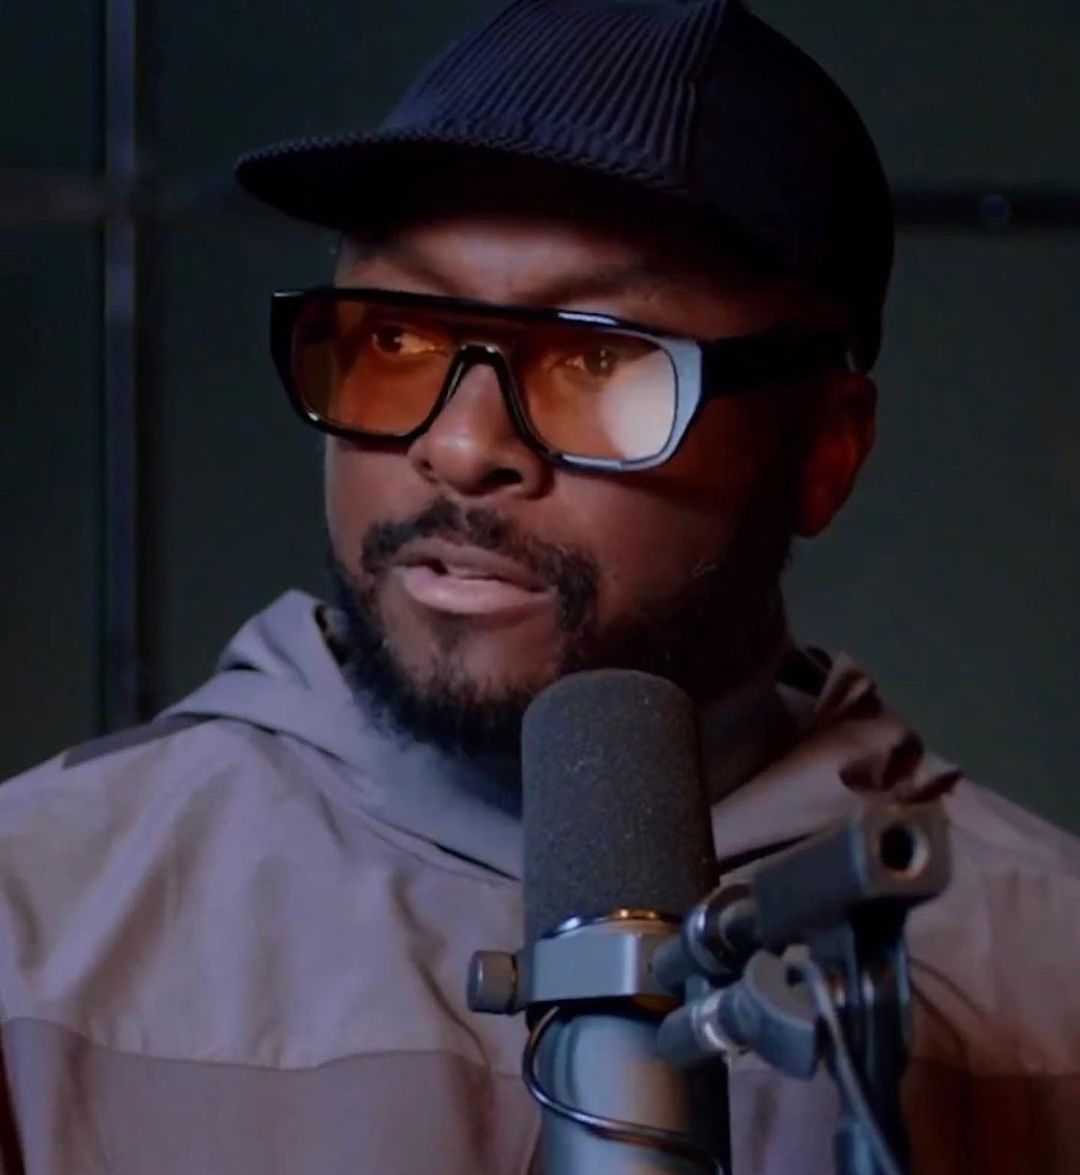 WILL.I.AM wearing the THIERRY LASRY “KLASSY” sunglasses